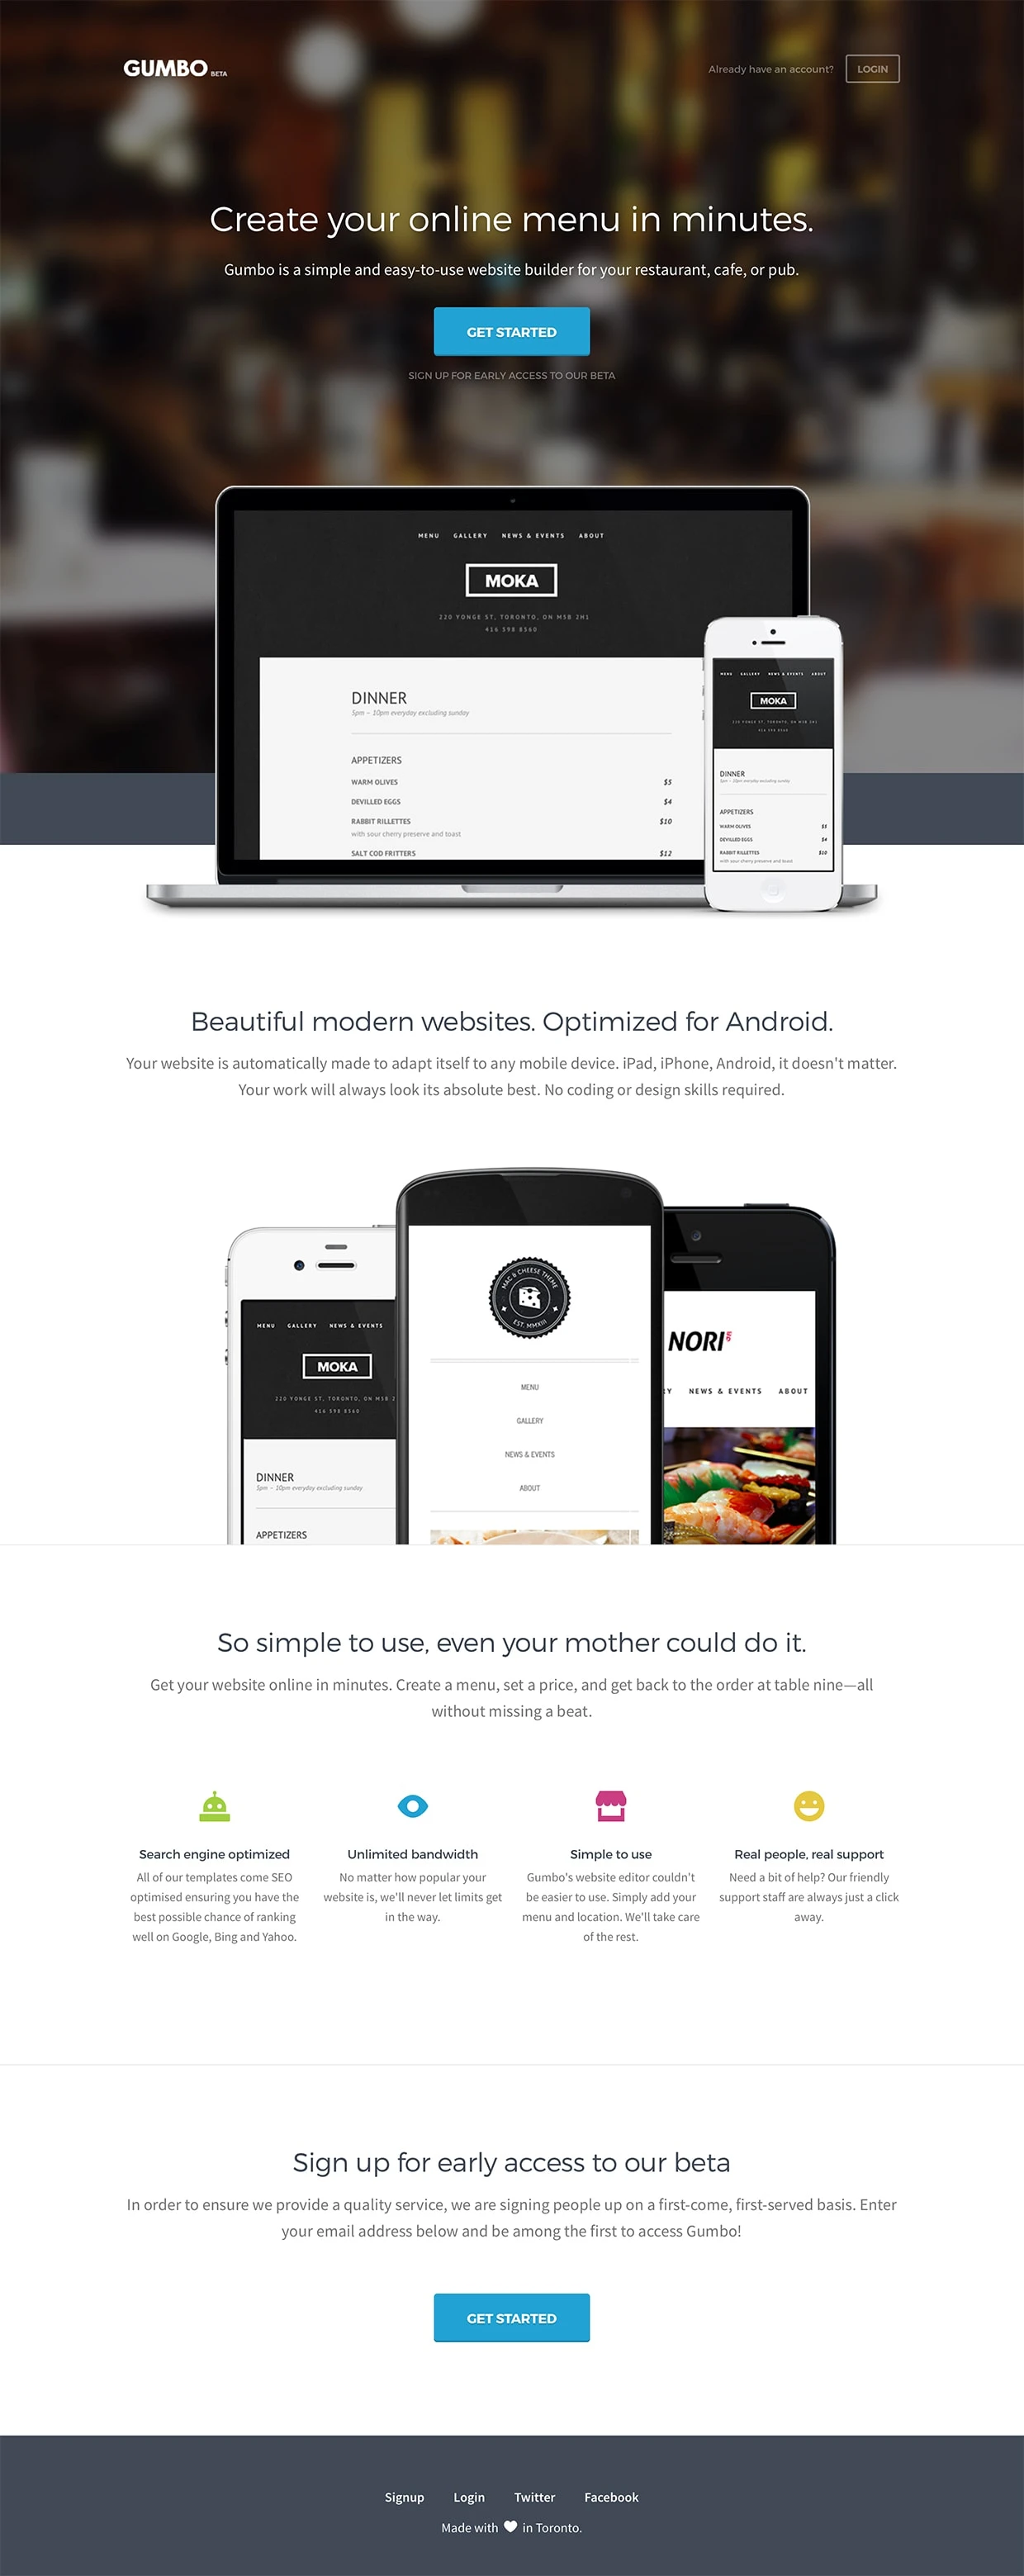 Gumbo Landing Page Example: Create your online menu